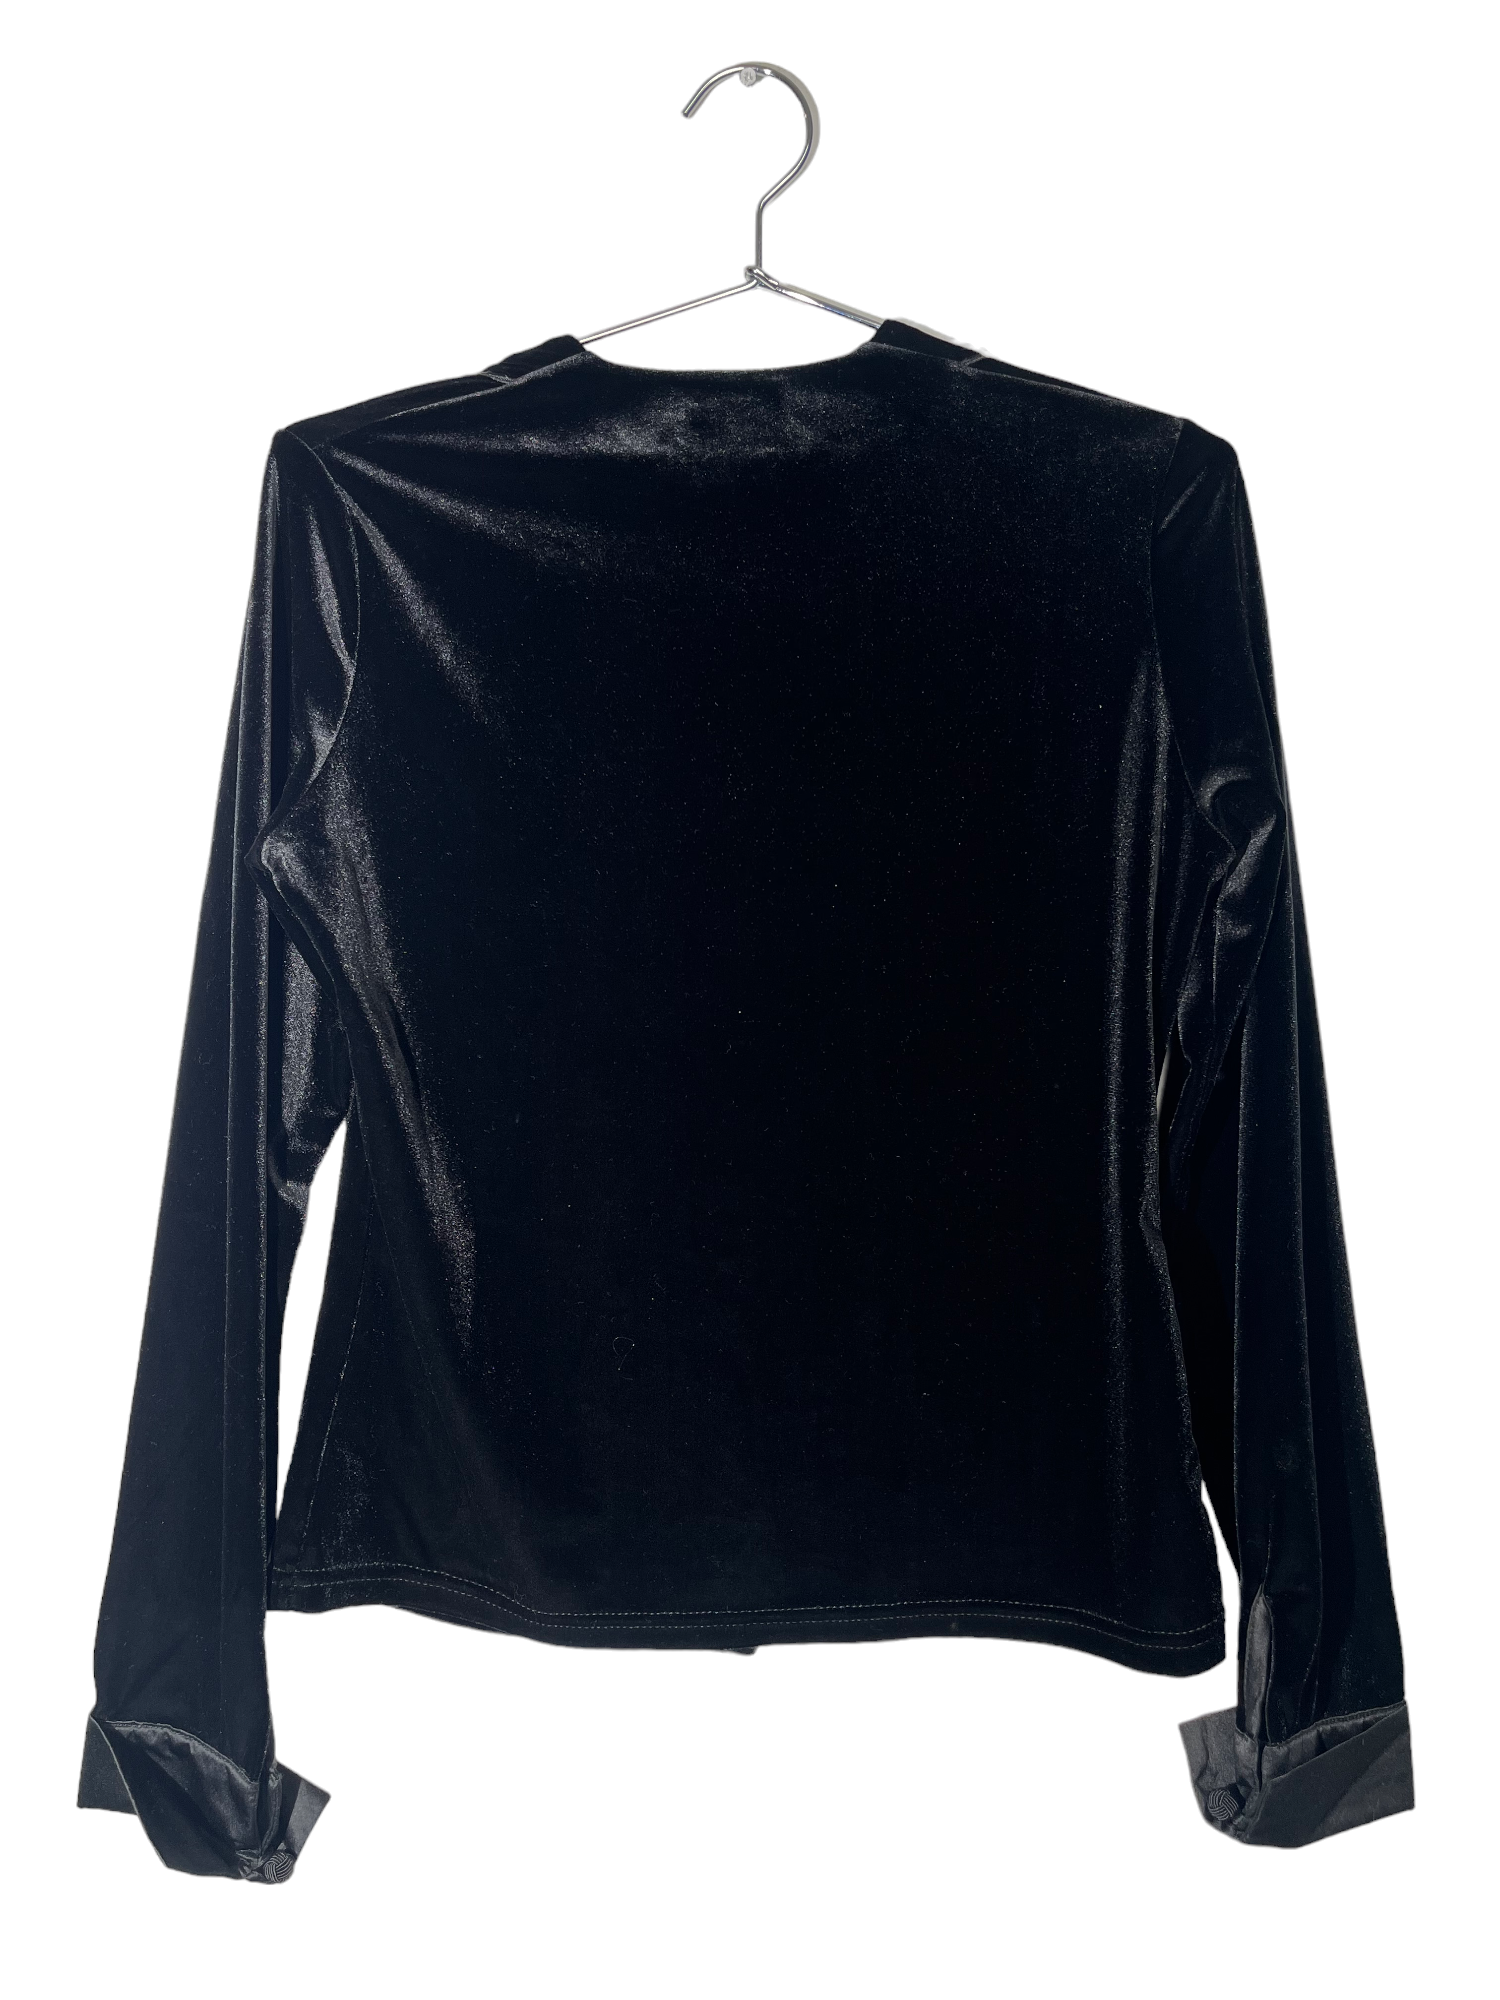 Black Button Up Long Sleeve Top